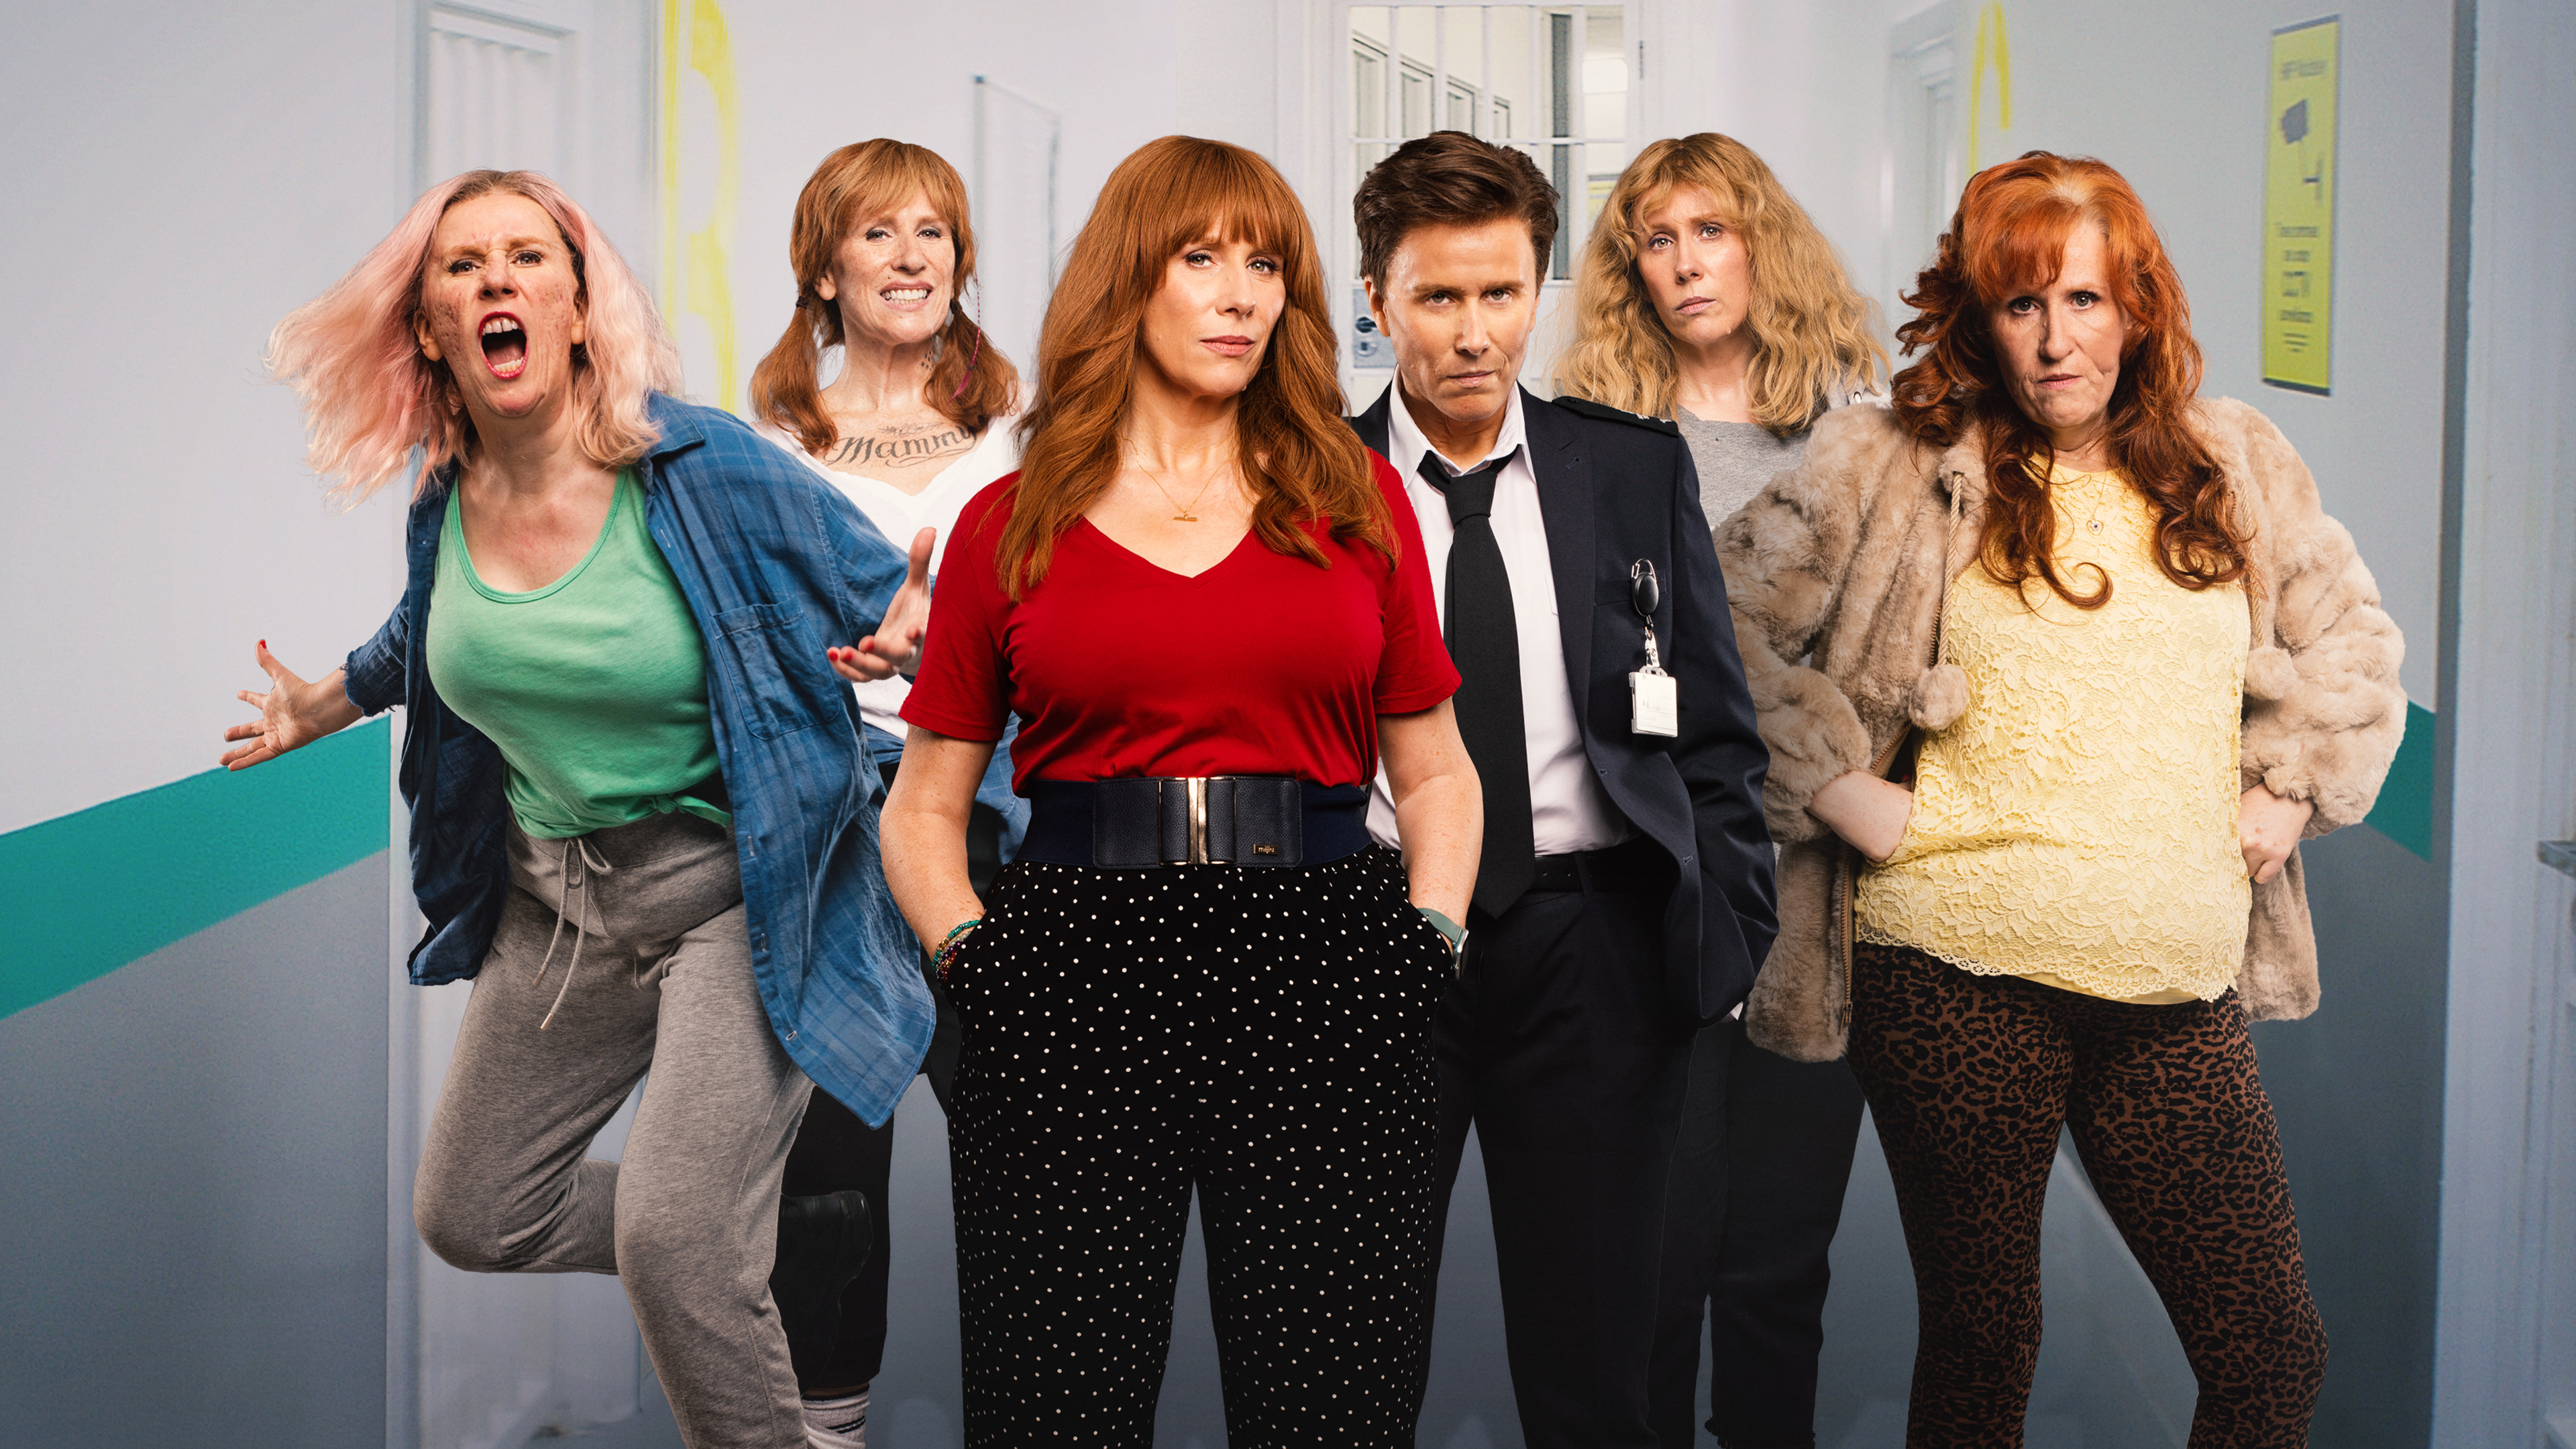 benjamin cipriano recommends catherine tate hot pic